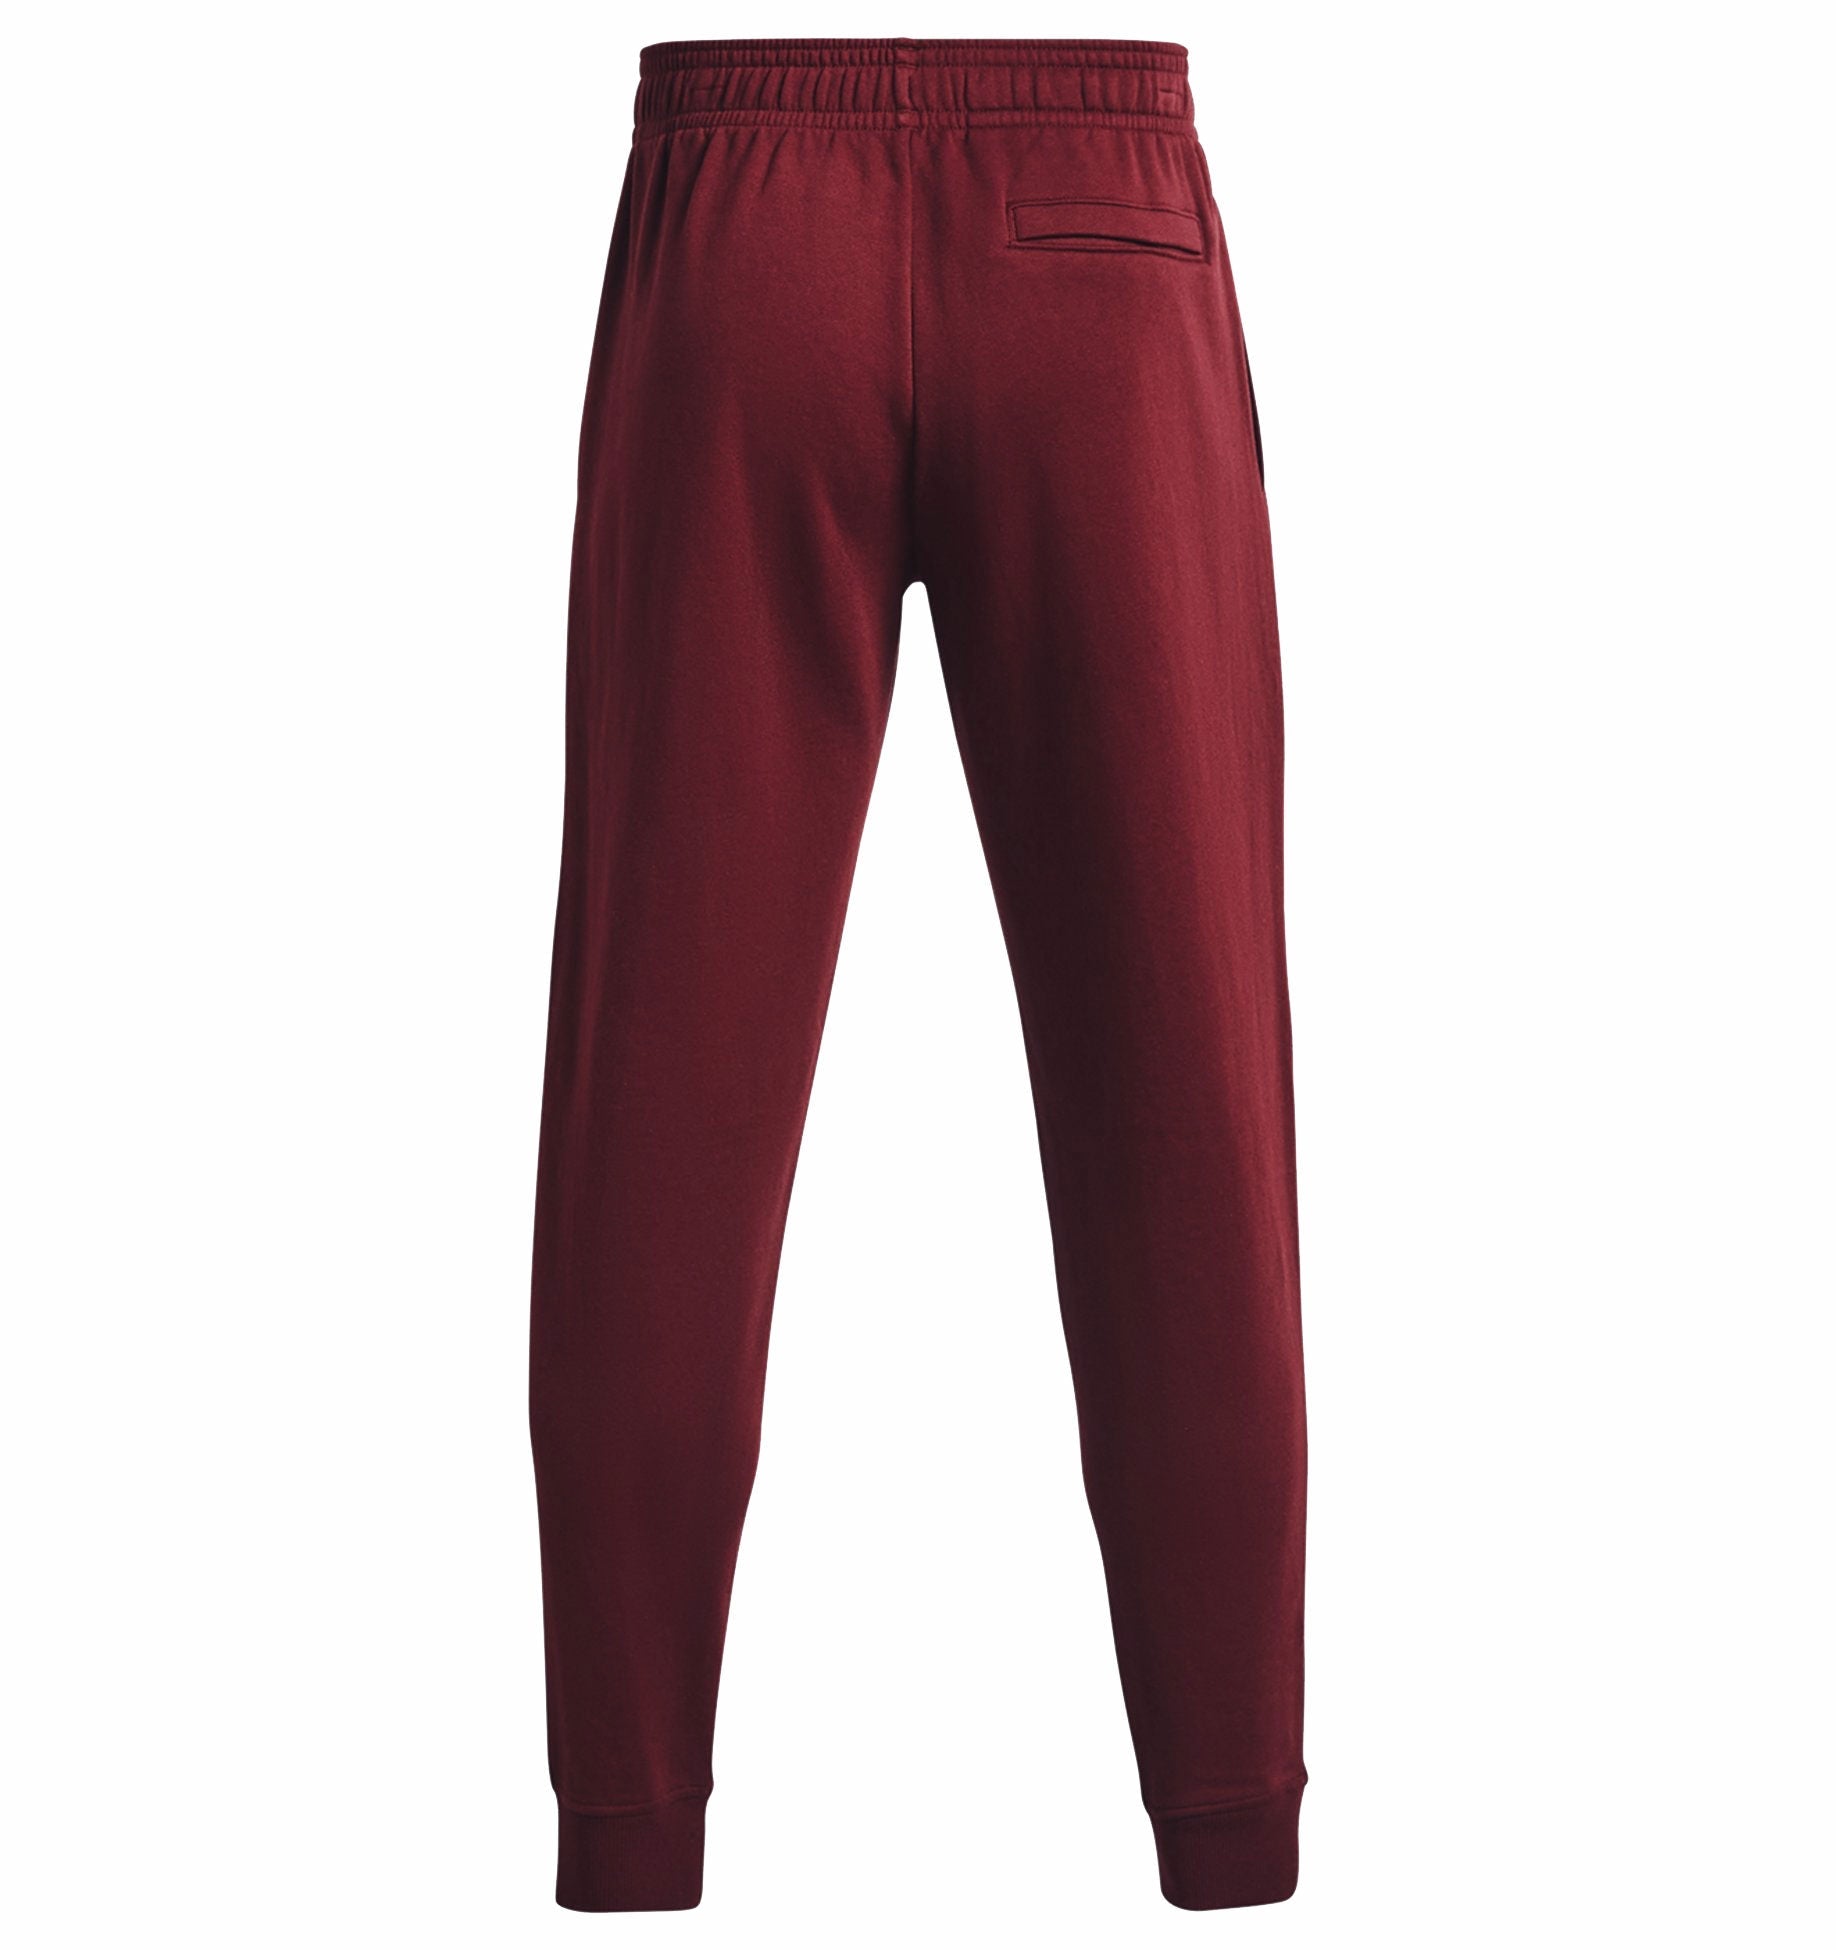 Under Armour Rival Fleece Sweat Pants - Mens - Chestnut Red/Onyx White